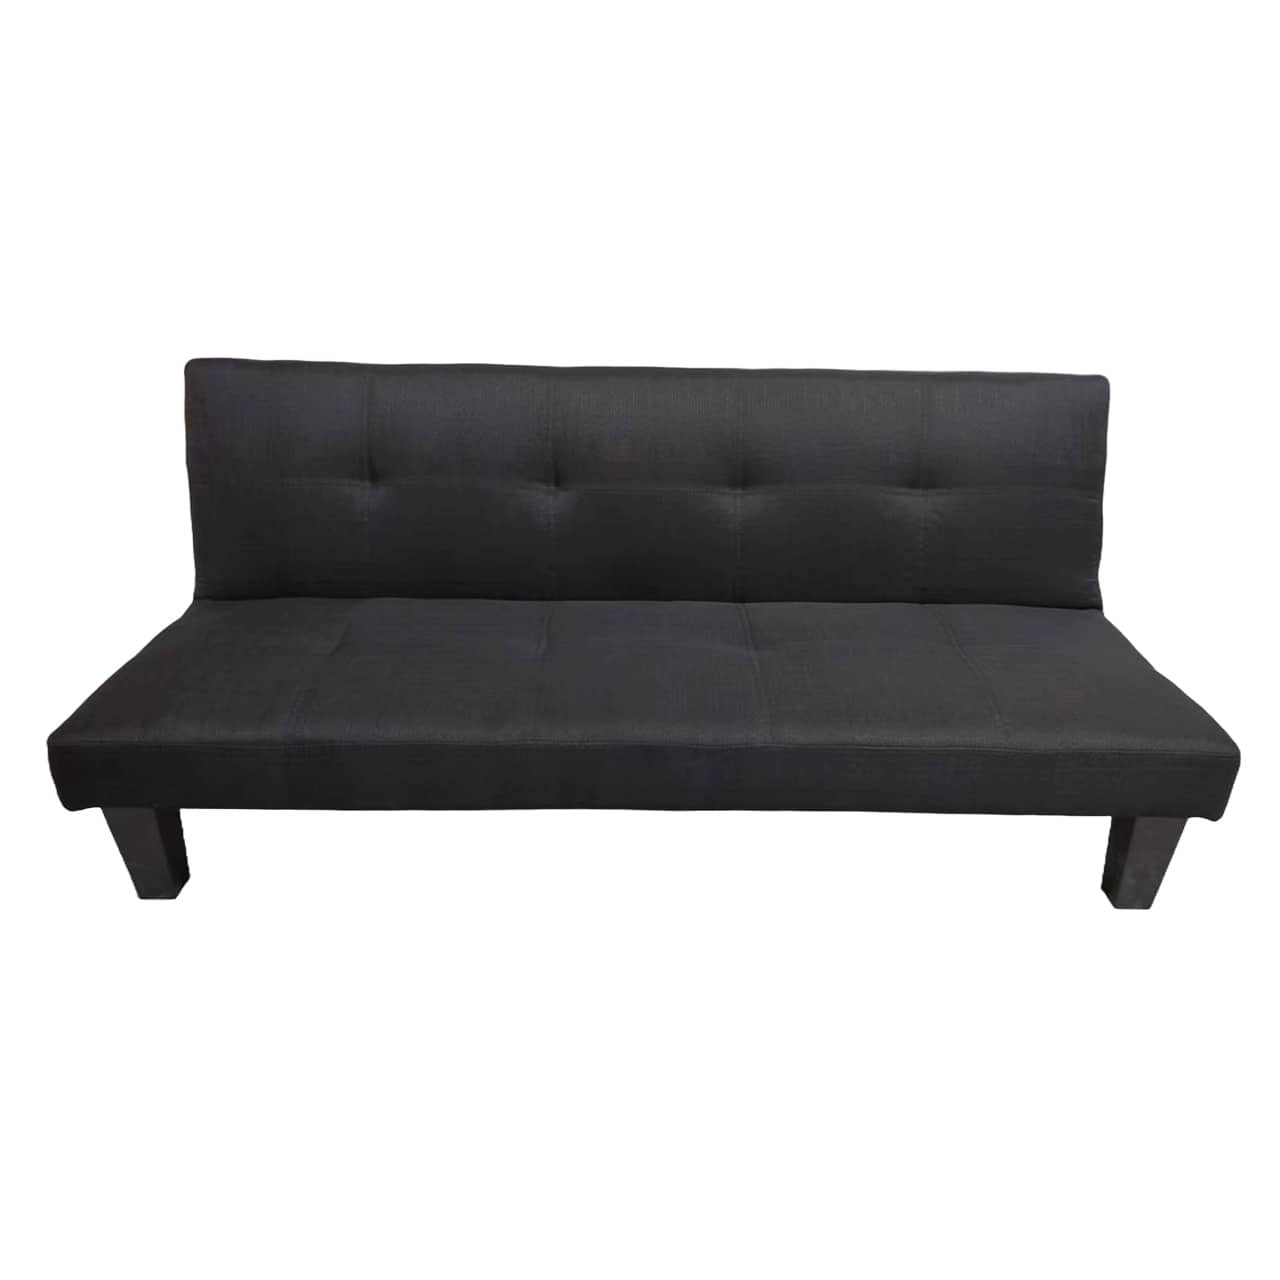 F113 Suede Black Sleeper Couch